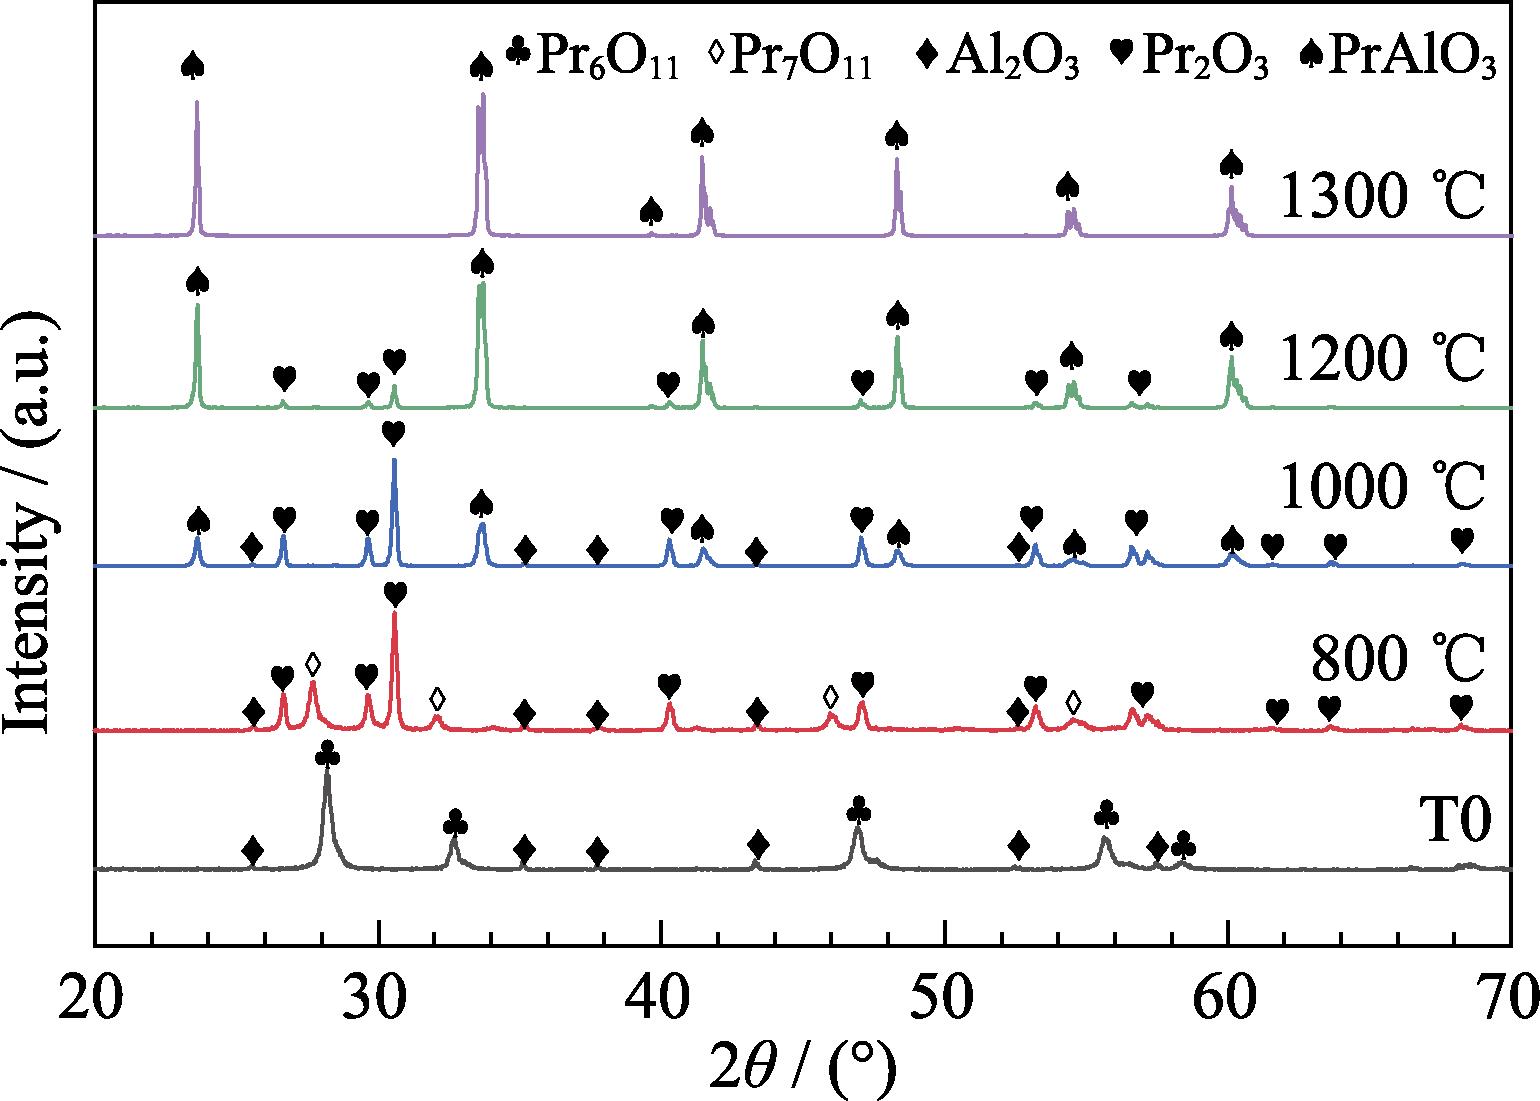 XRD patterns of T0 powder and powders calcined at different temperatures in Ar/H2 atmosphere